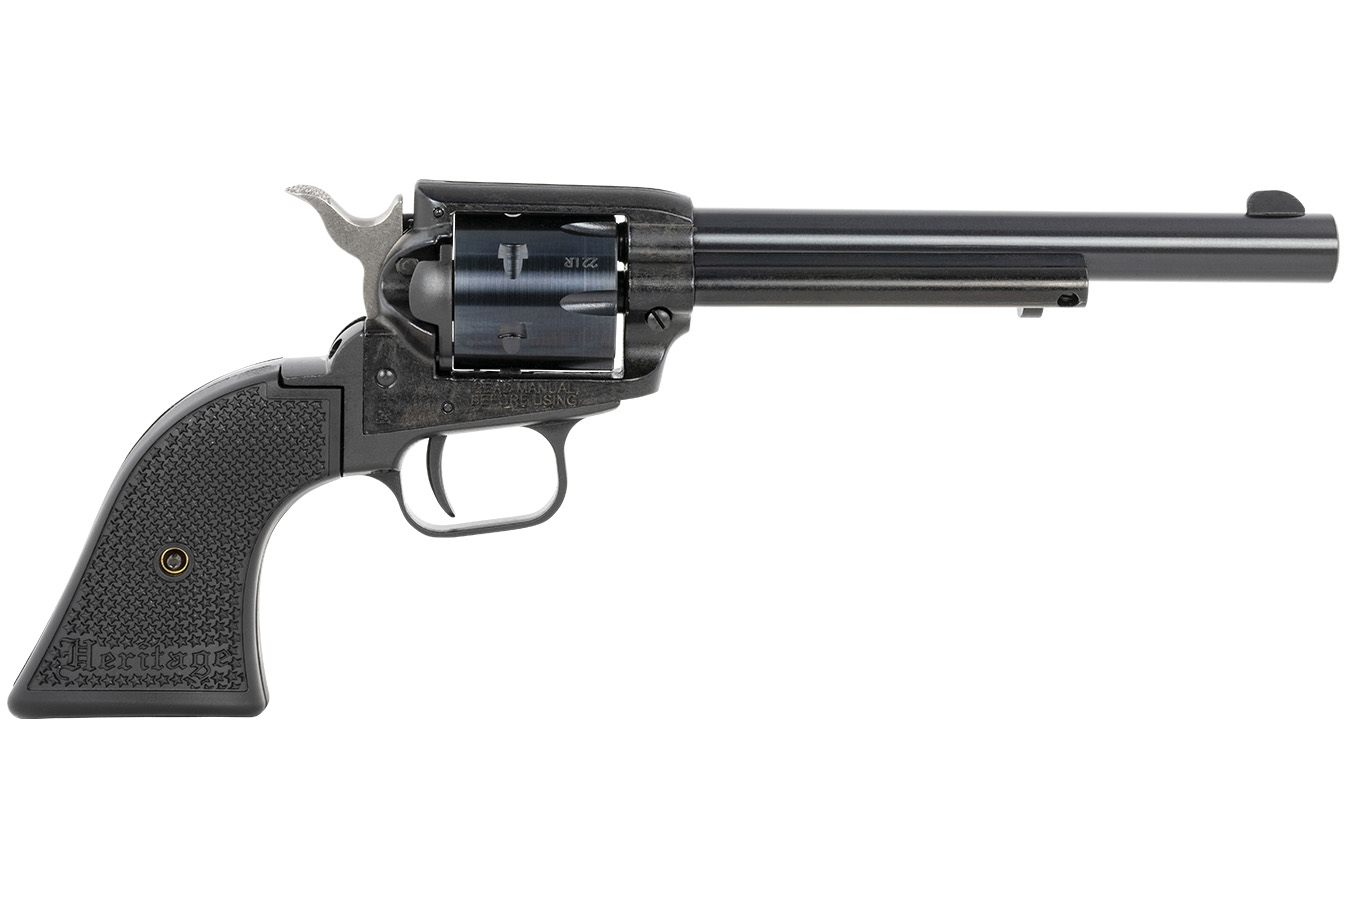 No. 6 Best Selling: HERITAGE ROUGH RIDER 22CAL 6.5 BARREL 6ROUNDS POLY GRIP